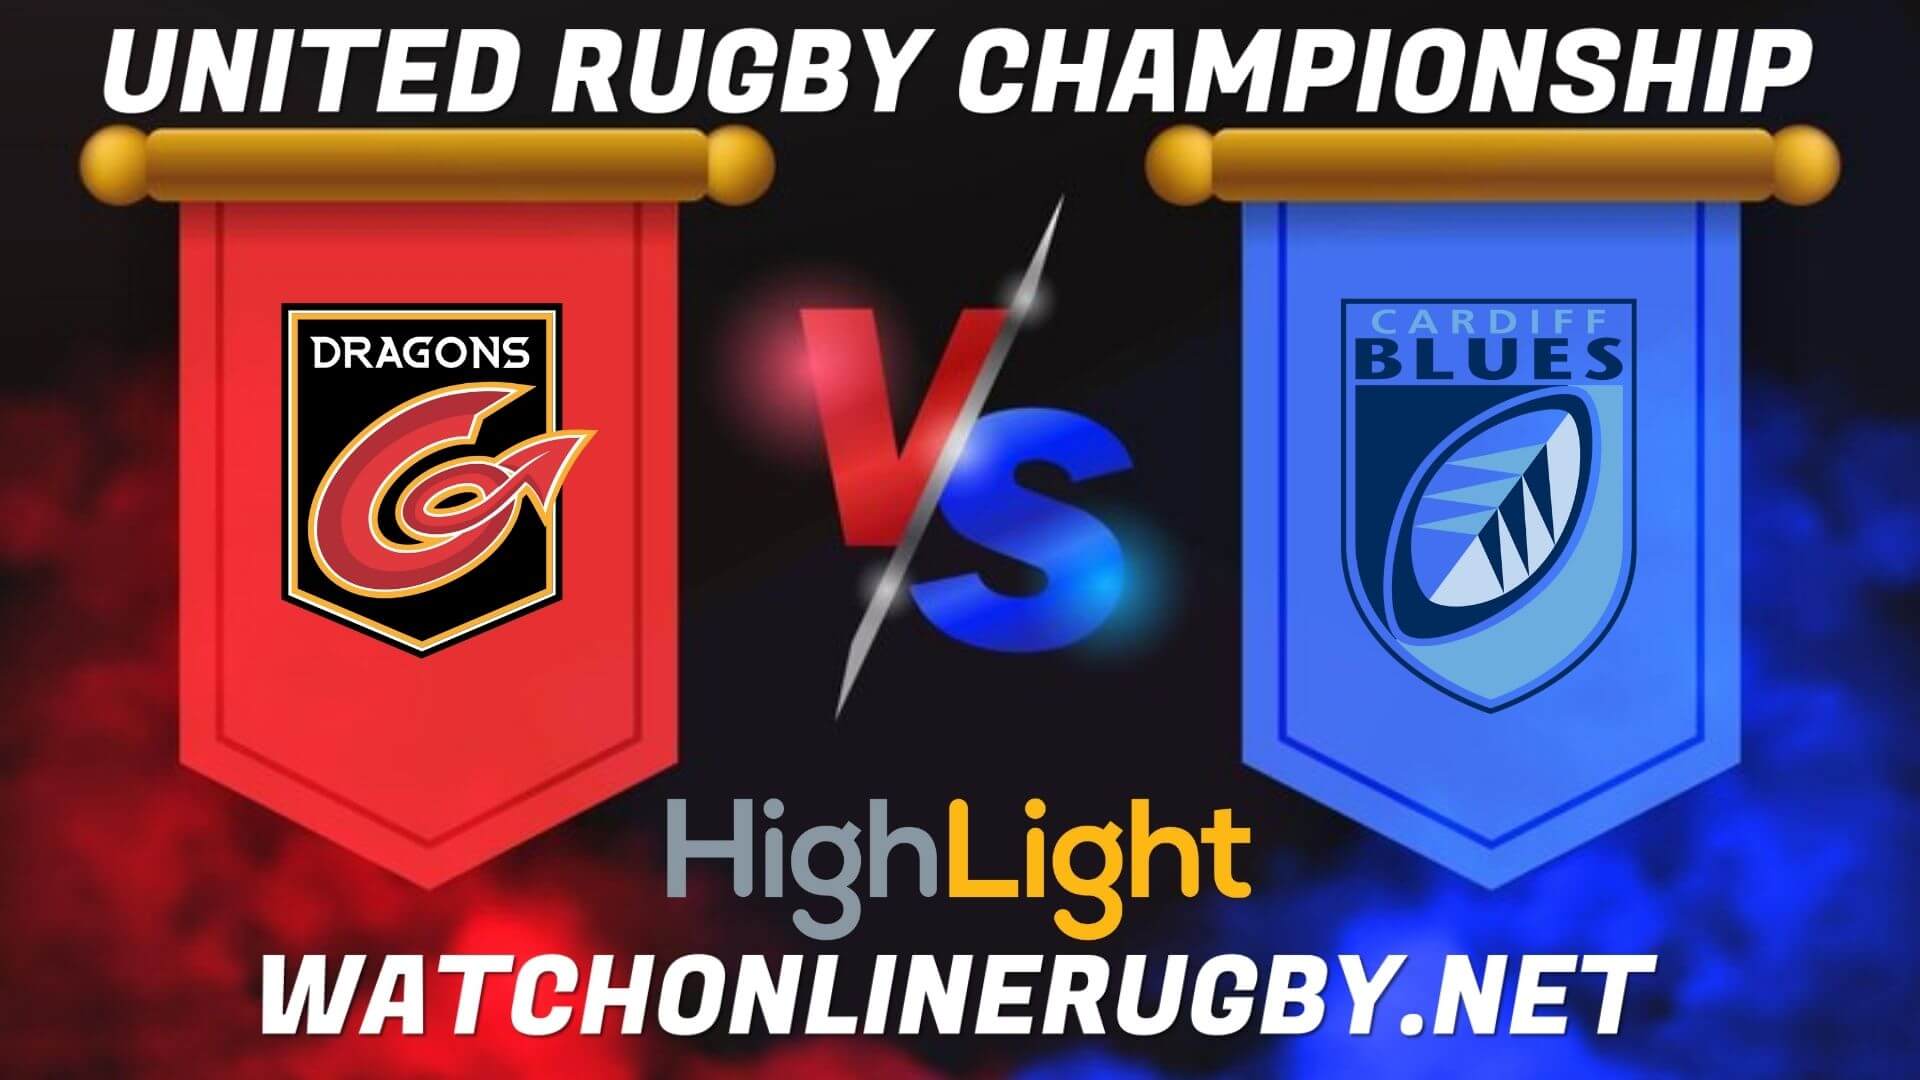 Dragons Vs Cardiff Rugby United Rugby Championship 2022 RD 9